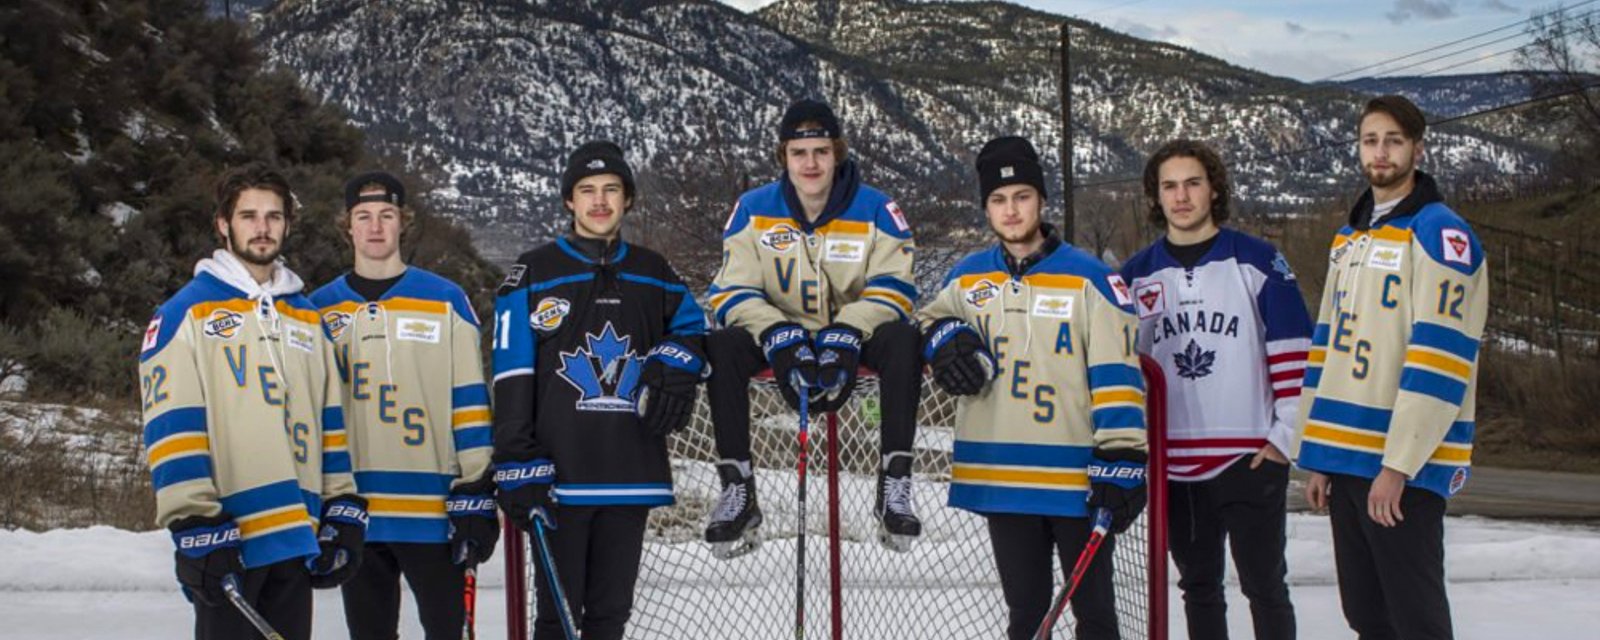 Meet the six NHL sons playing together in a small BC town and stealing the spotlight from their Dads